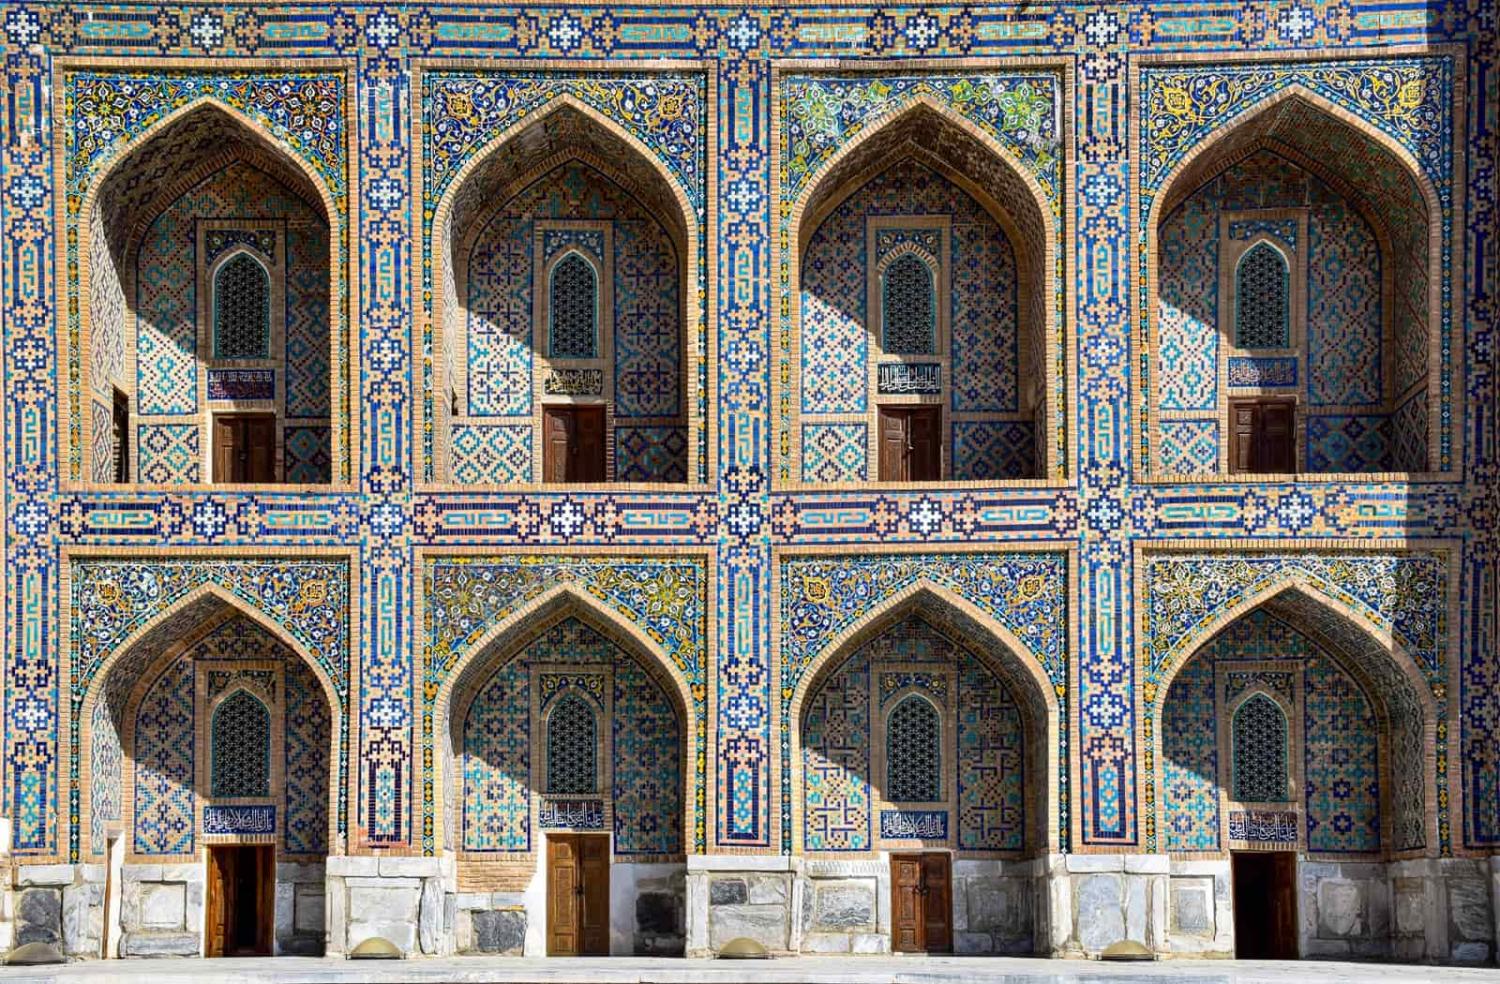 Samarkand lies on the Silk Road, the ancient trade route linking China to the Mediterranean (AXP Photography/Unsplash)